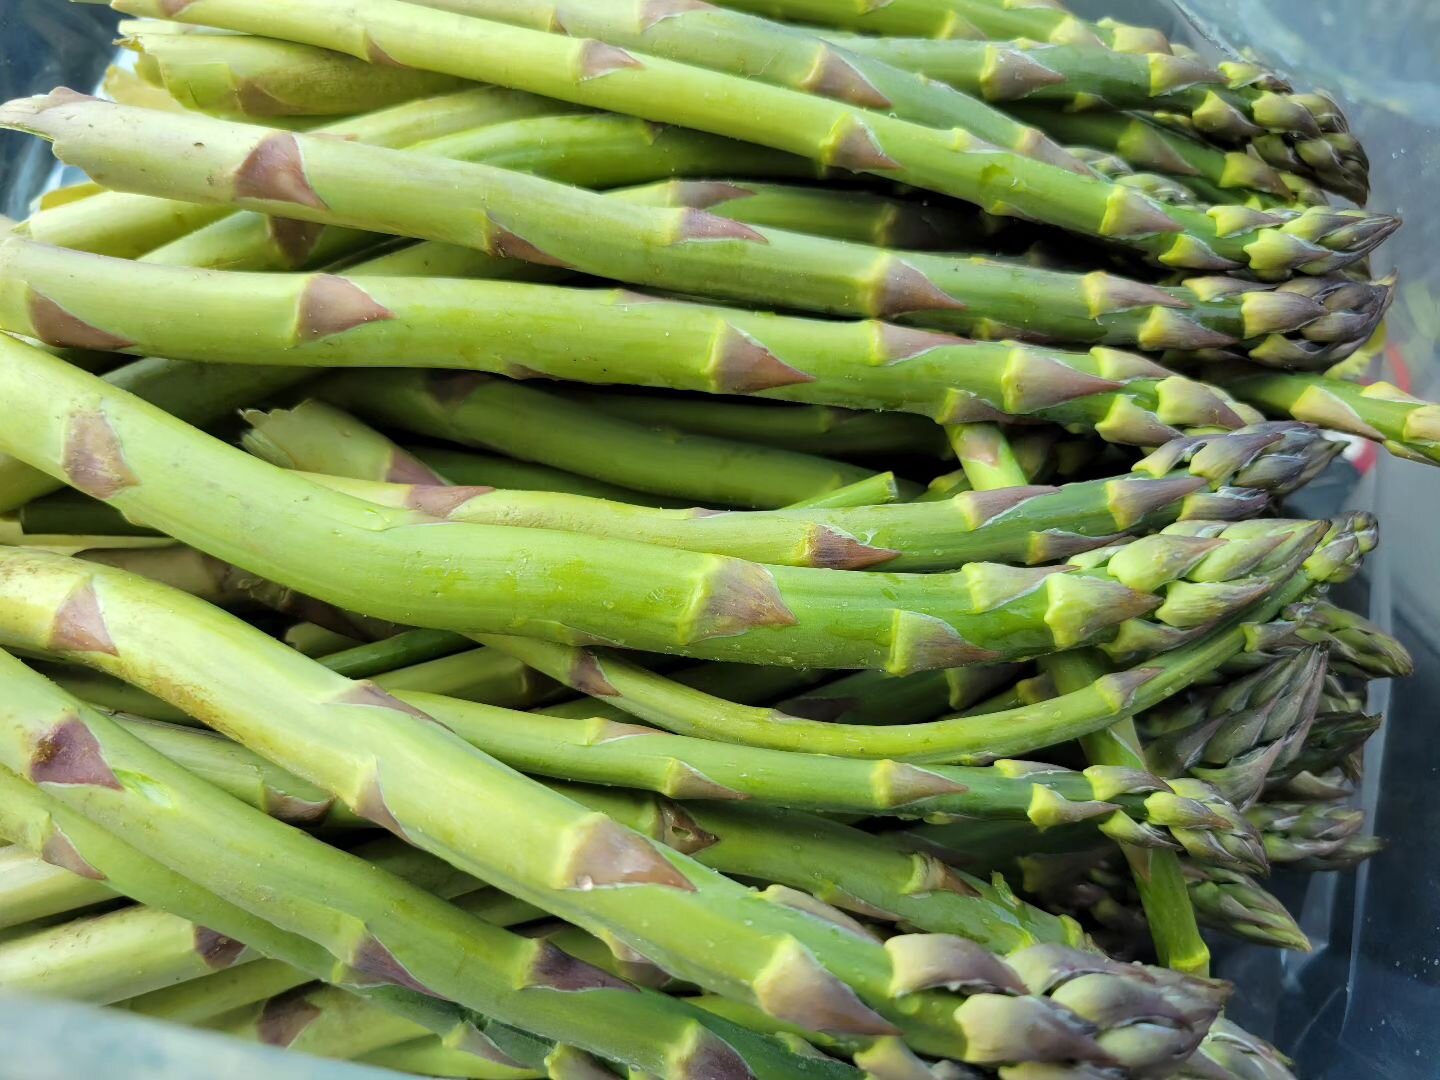 We won't have new weekly features until tomorrow, simply because we're getting @crispcountryacres Asparagus delivered tomorrow for our beer battered asparagus! We're so excited for Asparagus season!! 

#supportfarmers #downtownkalamazoo #lfg #arcade 